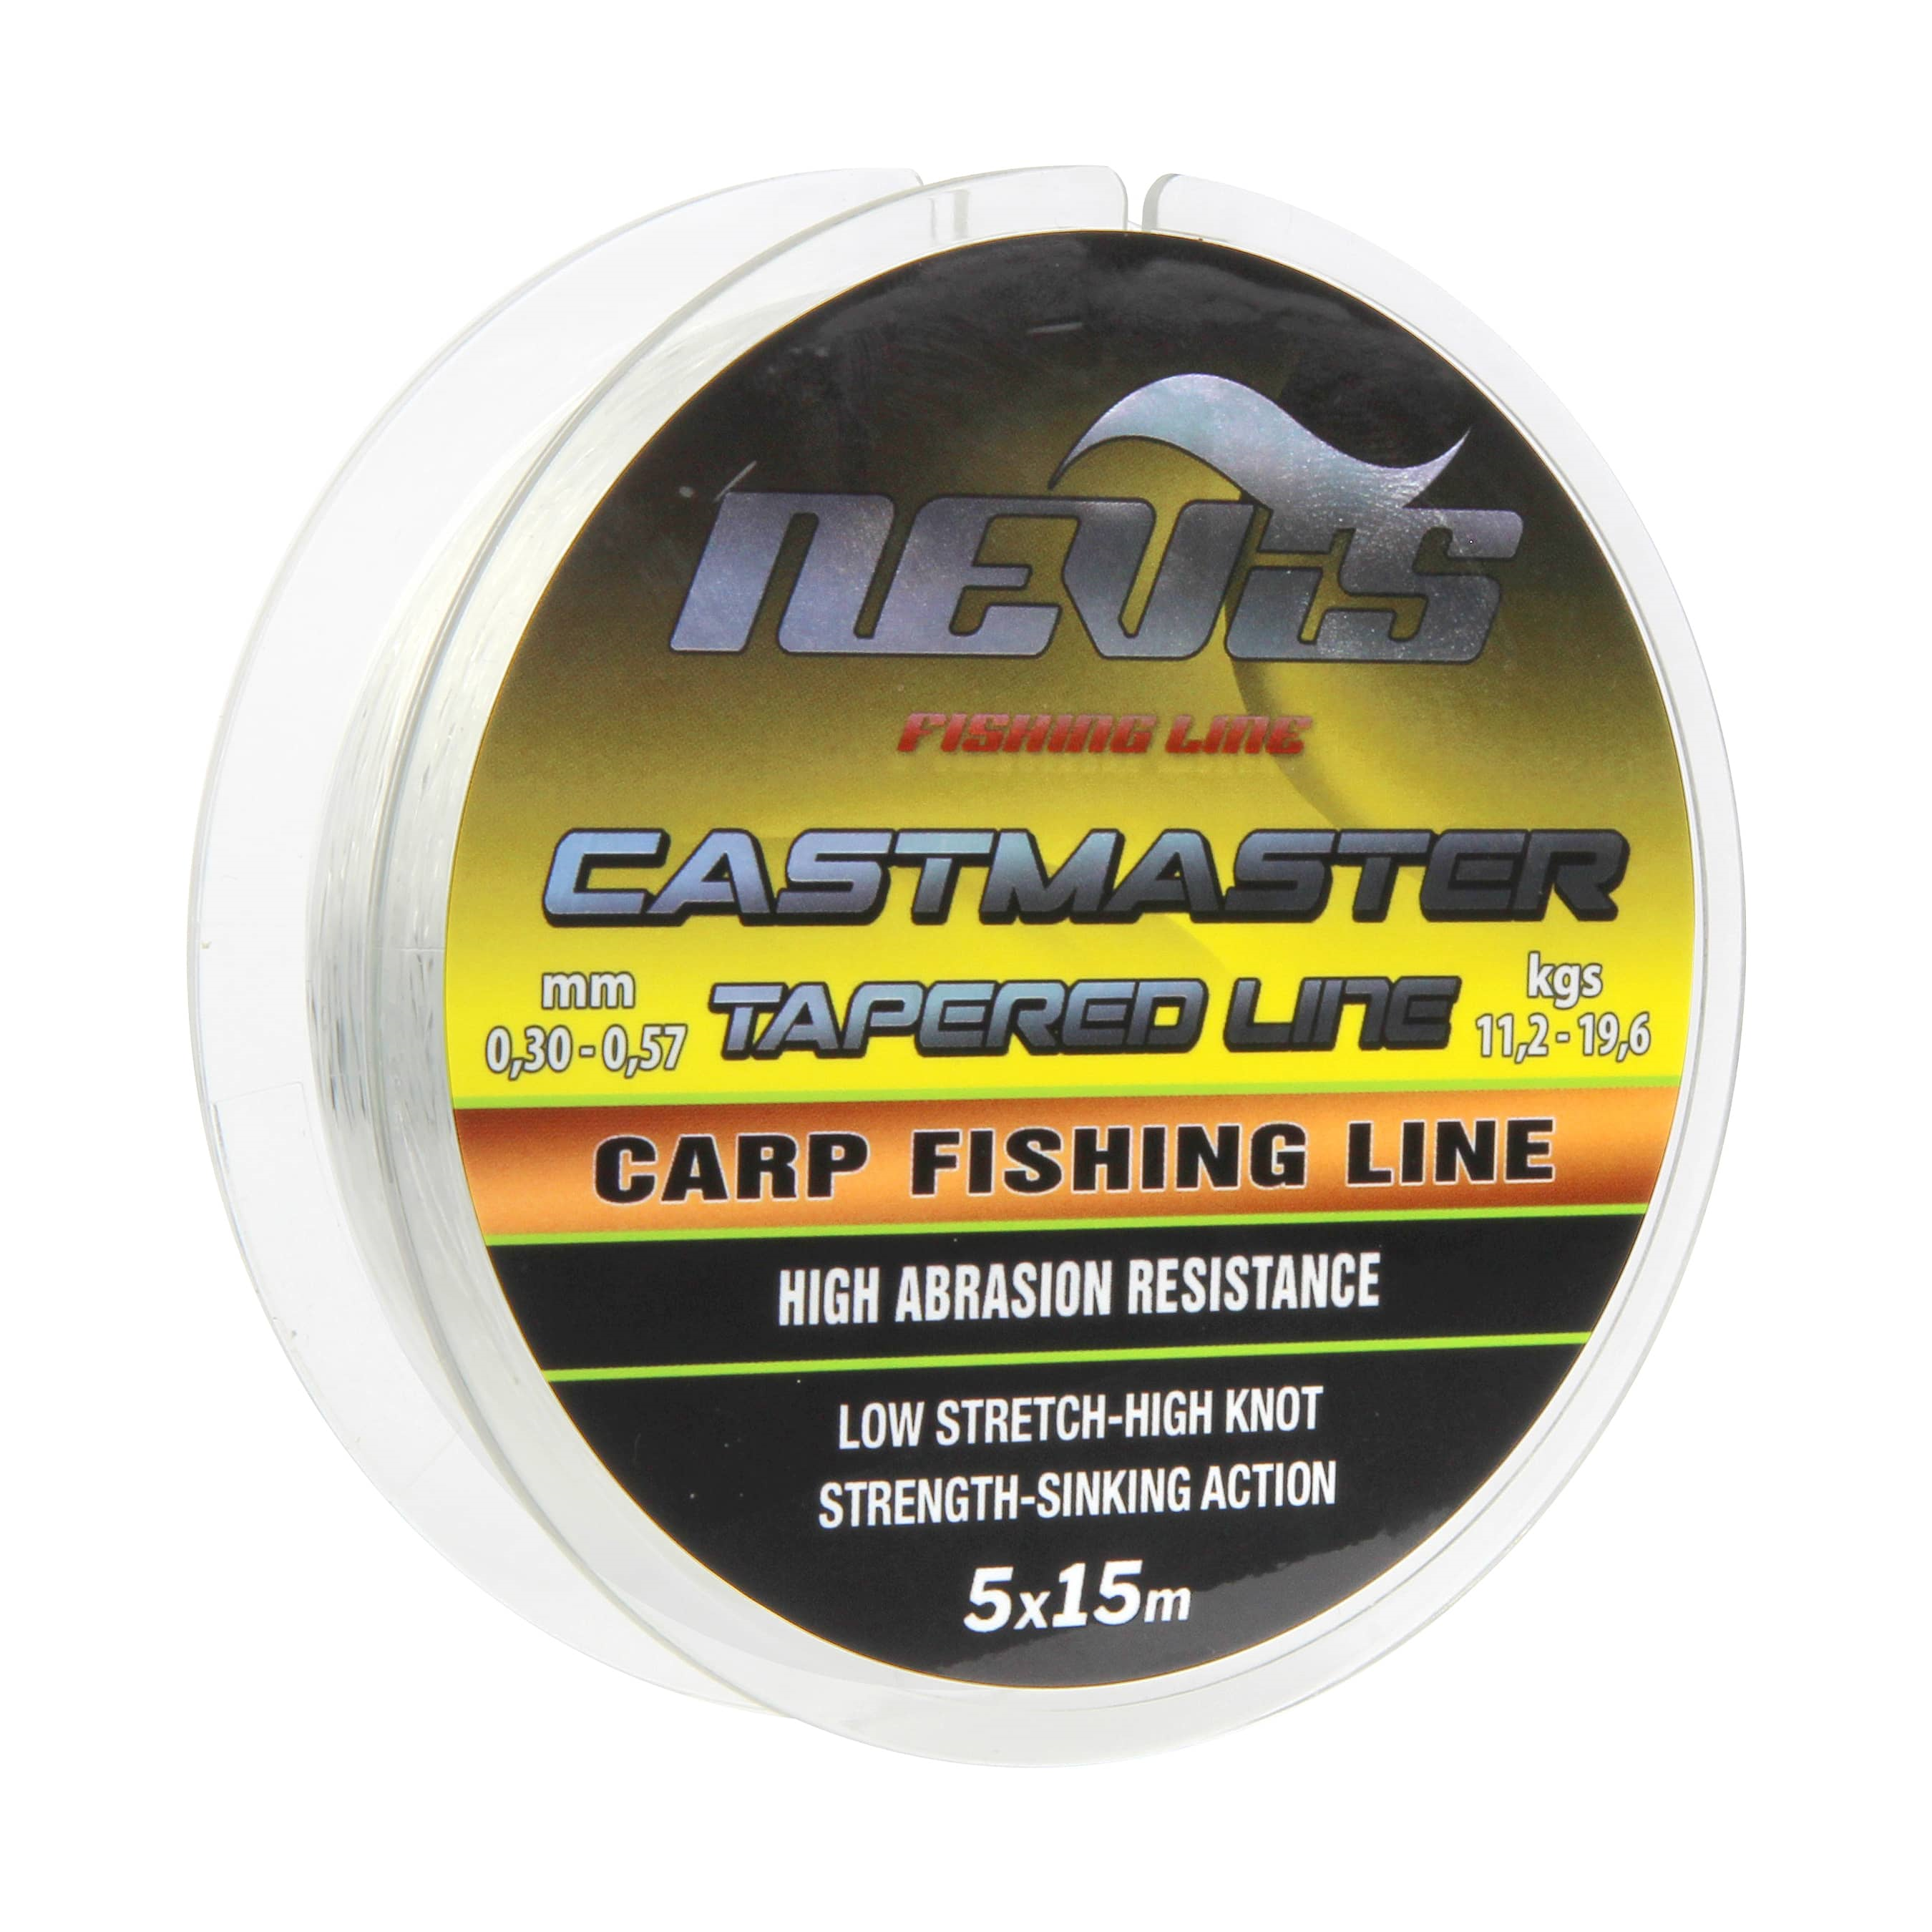 NEVIS CASTMASTER TAPERED LINE 5 x15M 0,30-0,57 MM